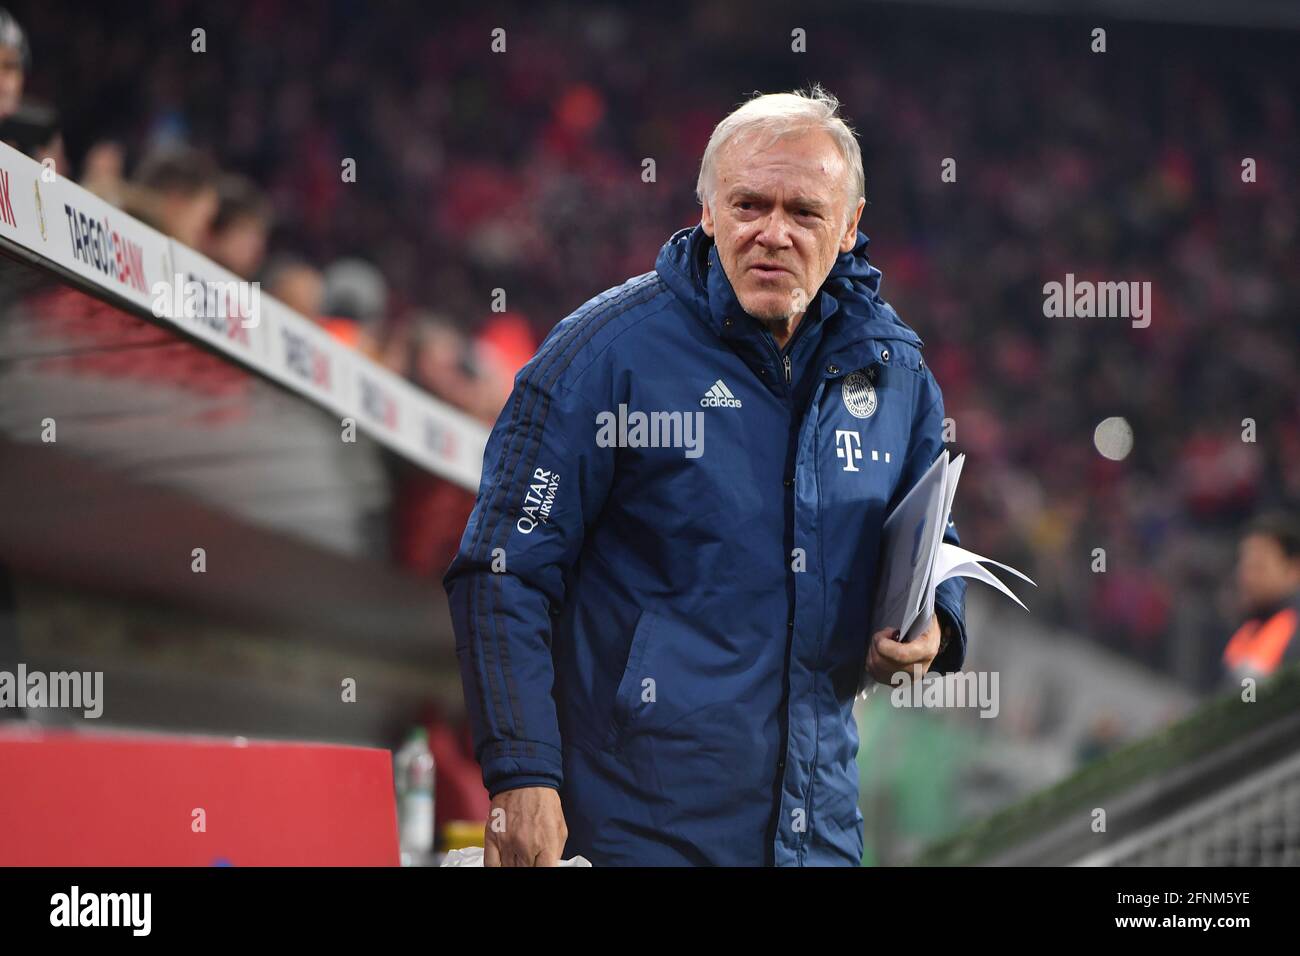 Confirmed: Hermann GERLAND, Co coach FC Bayern Munich, is leaving FC Bayern  at the end of the season. Archive photo; Hermann GERLAND, Co coach FC  Bayern Munich, single image, trimmed single motif,